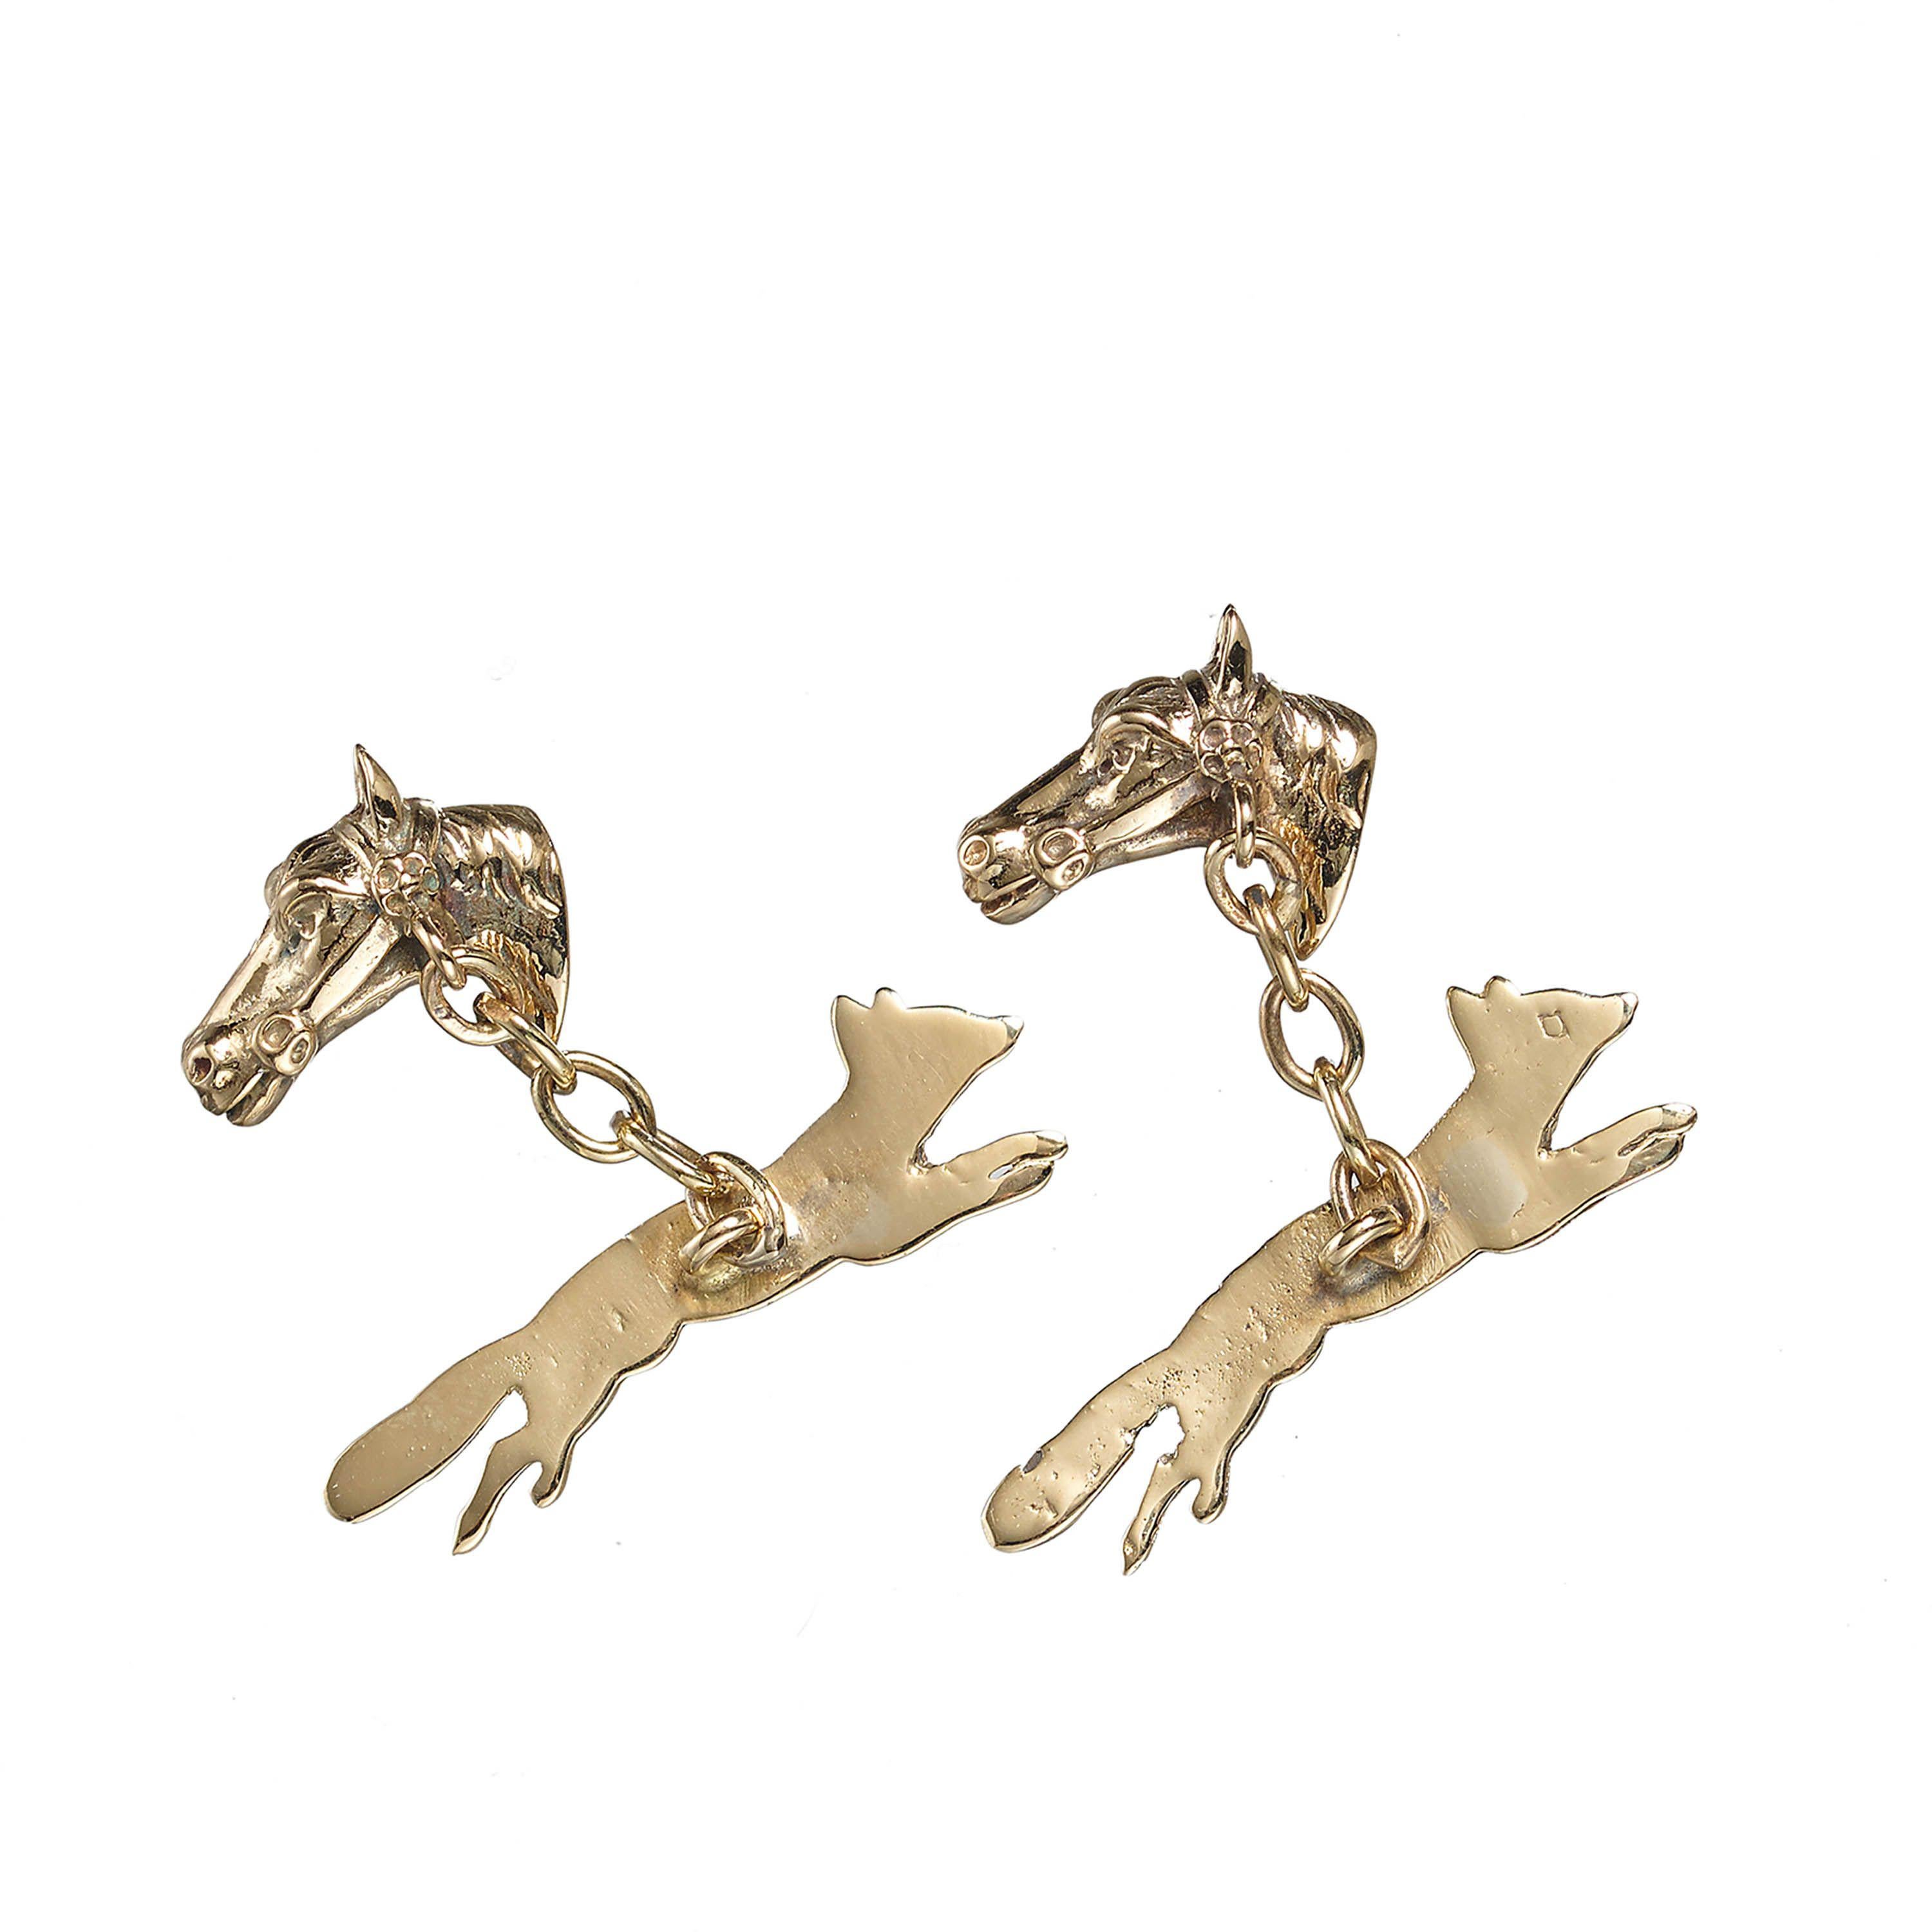 A pair vintage fox and horse gold hunting cufflinks, with a horse's head, with bridle on one side and a running fox on the other, with engraved texture, to look like fur, with chain links, mounted in 14ct gold, circa 1940.

Measurements: Horses 15.6